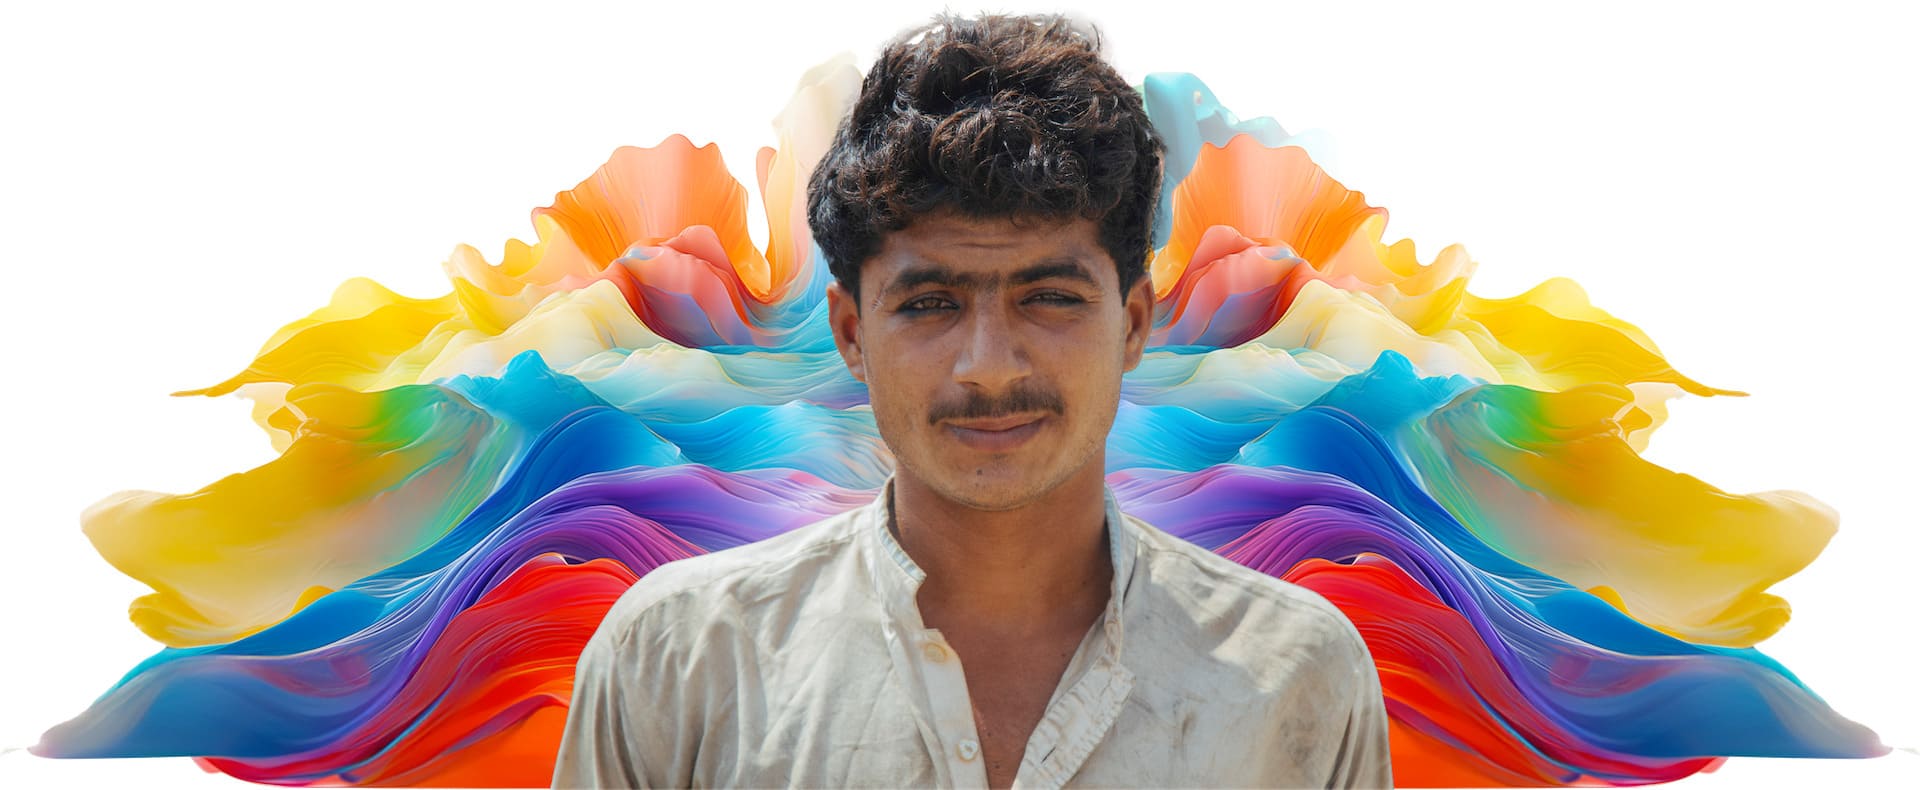 Photo of a Pakistani man against an abstract colorful background